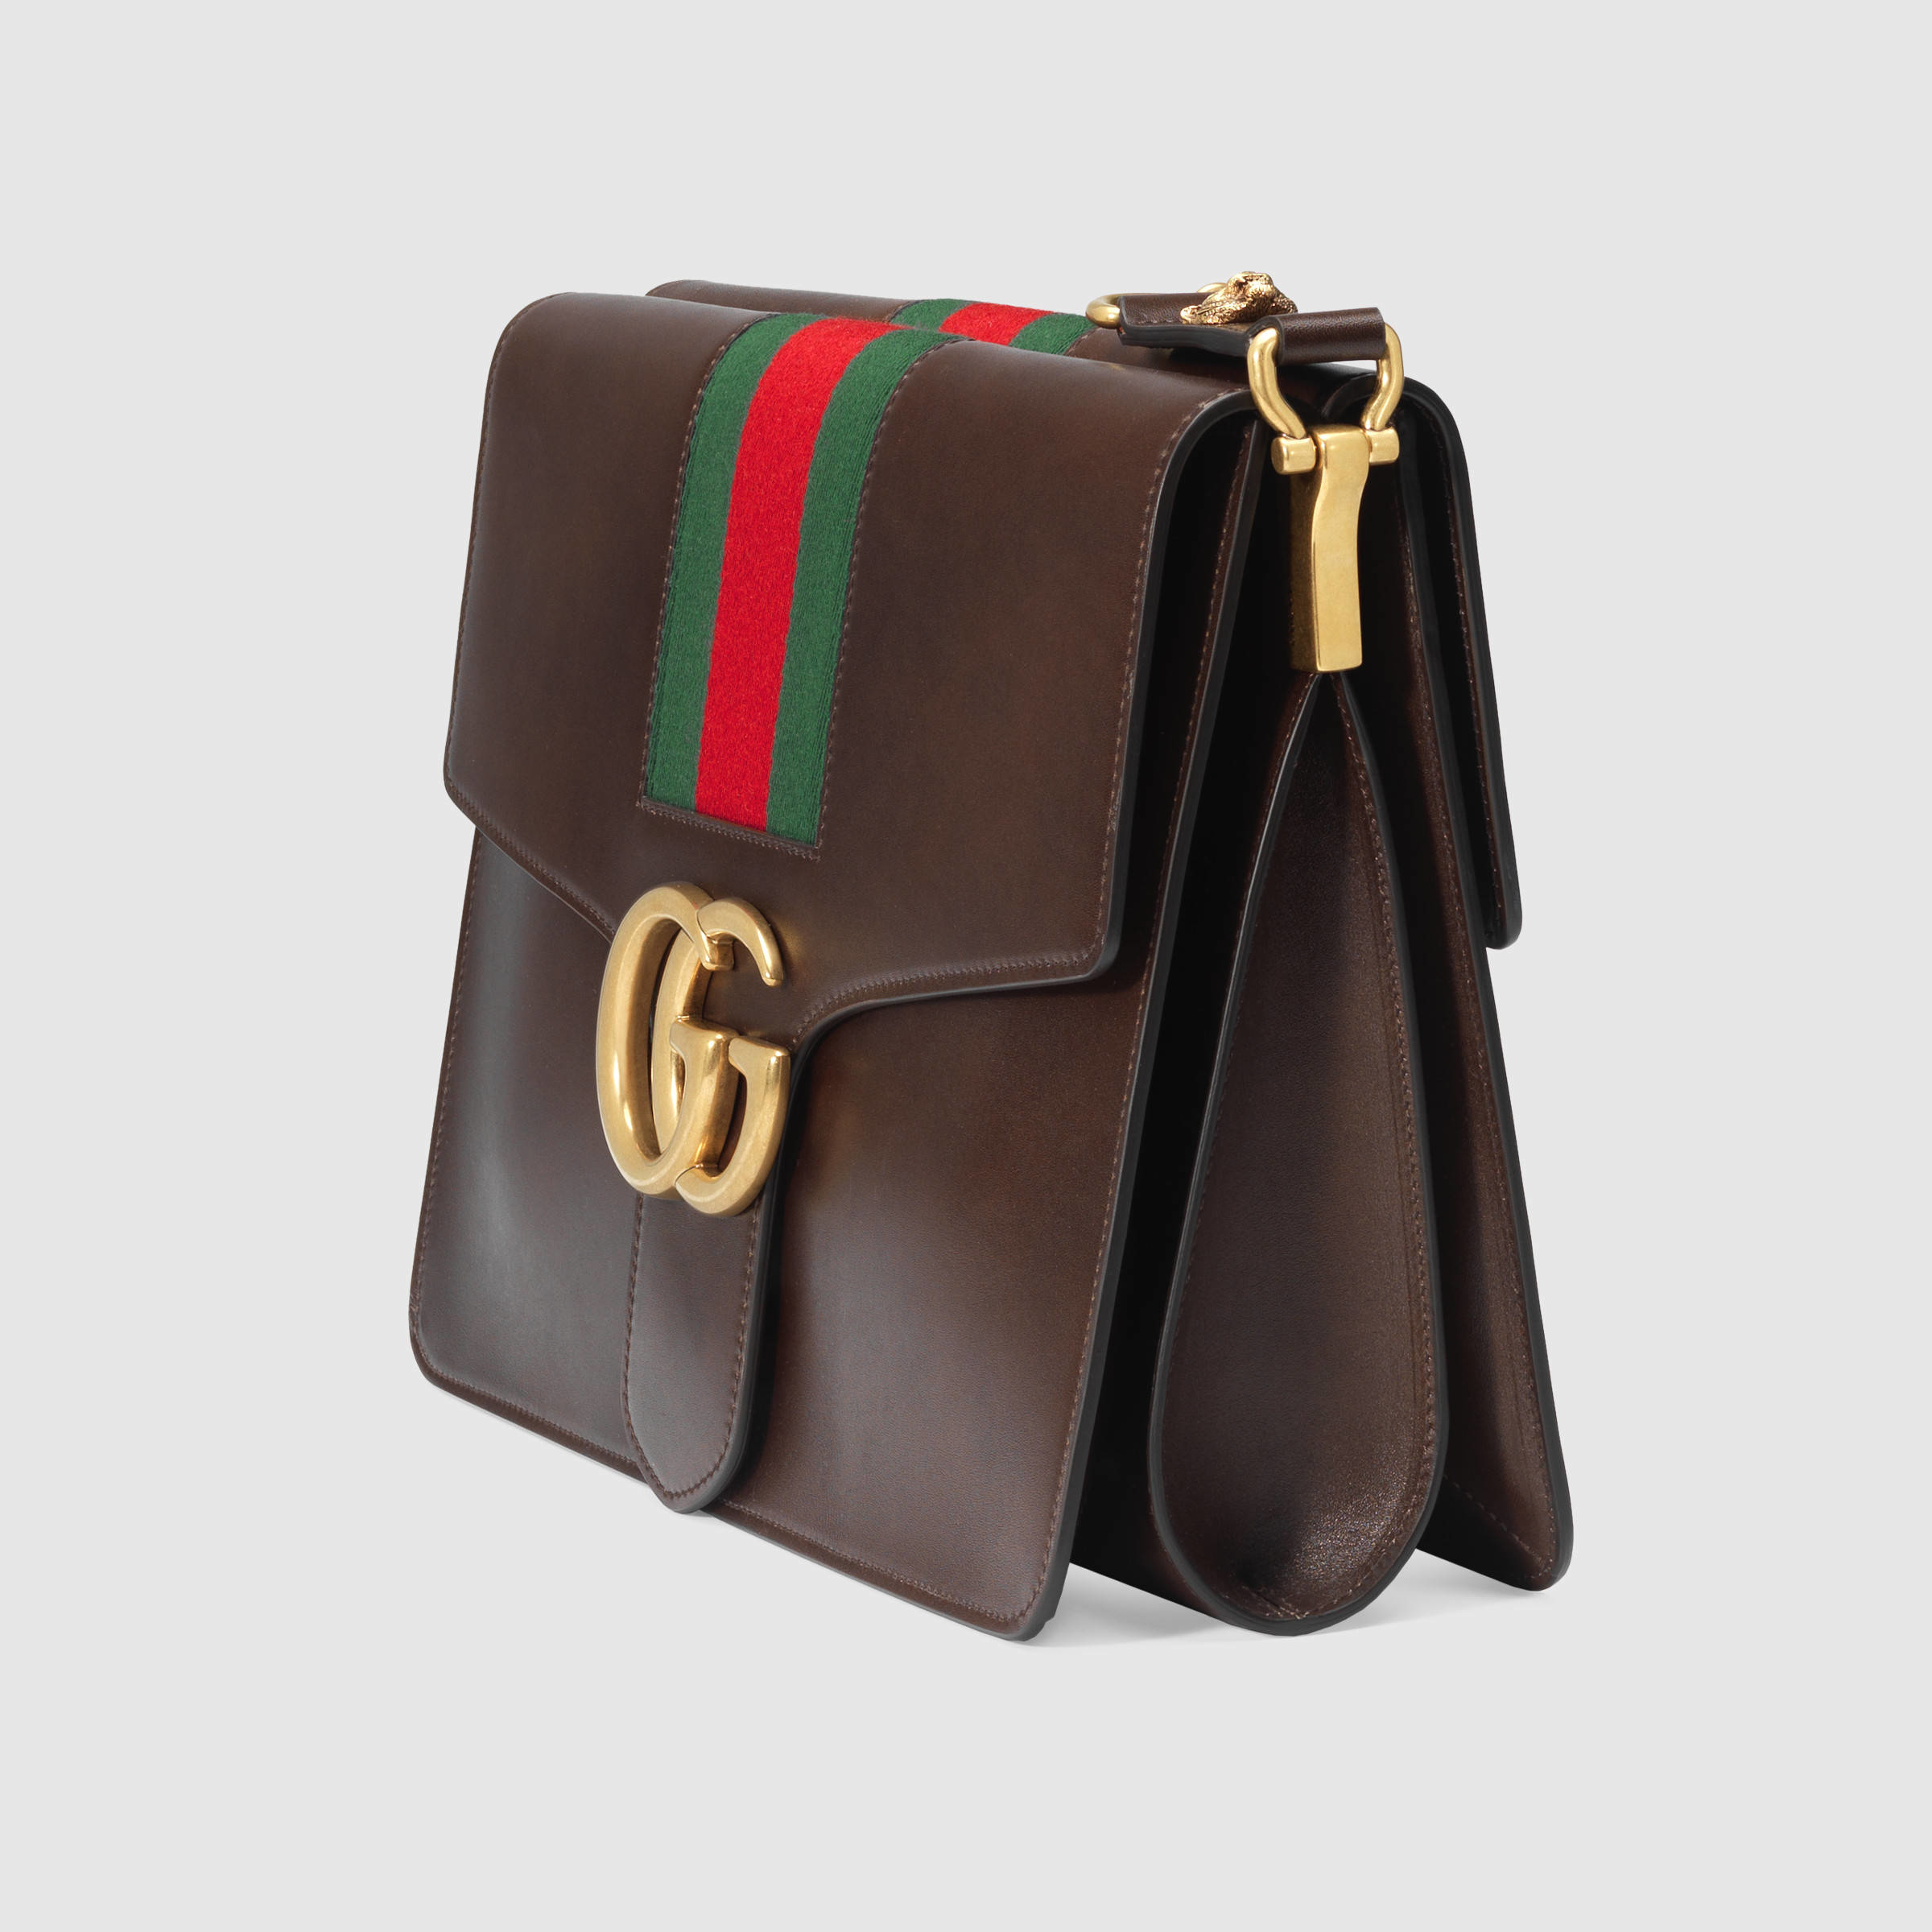 Gucci GG Marmont Leather Shoulder Bag in Brown - Lyst